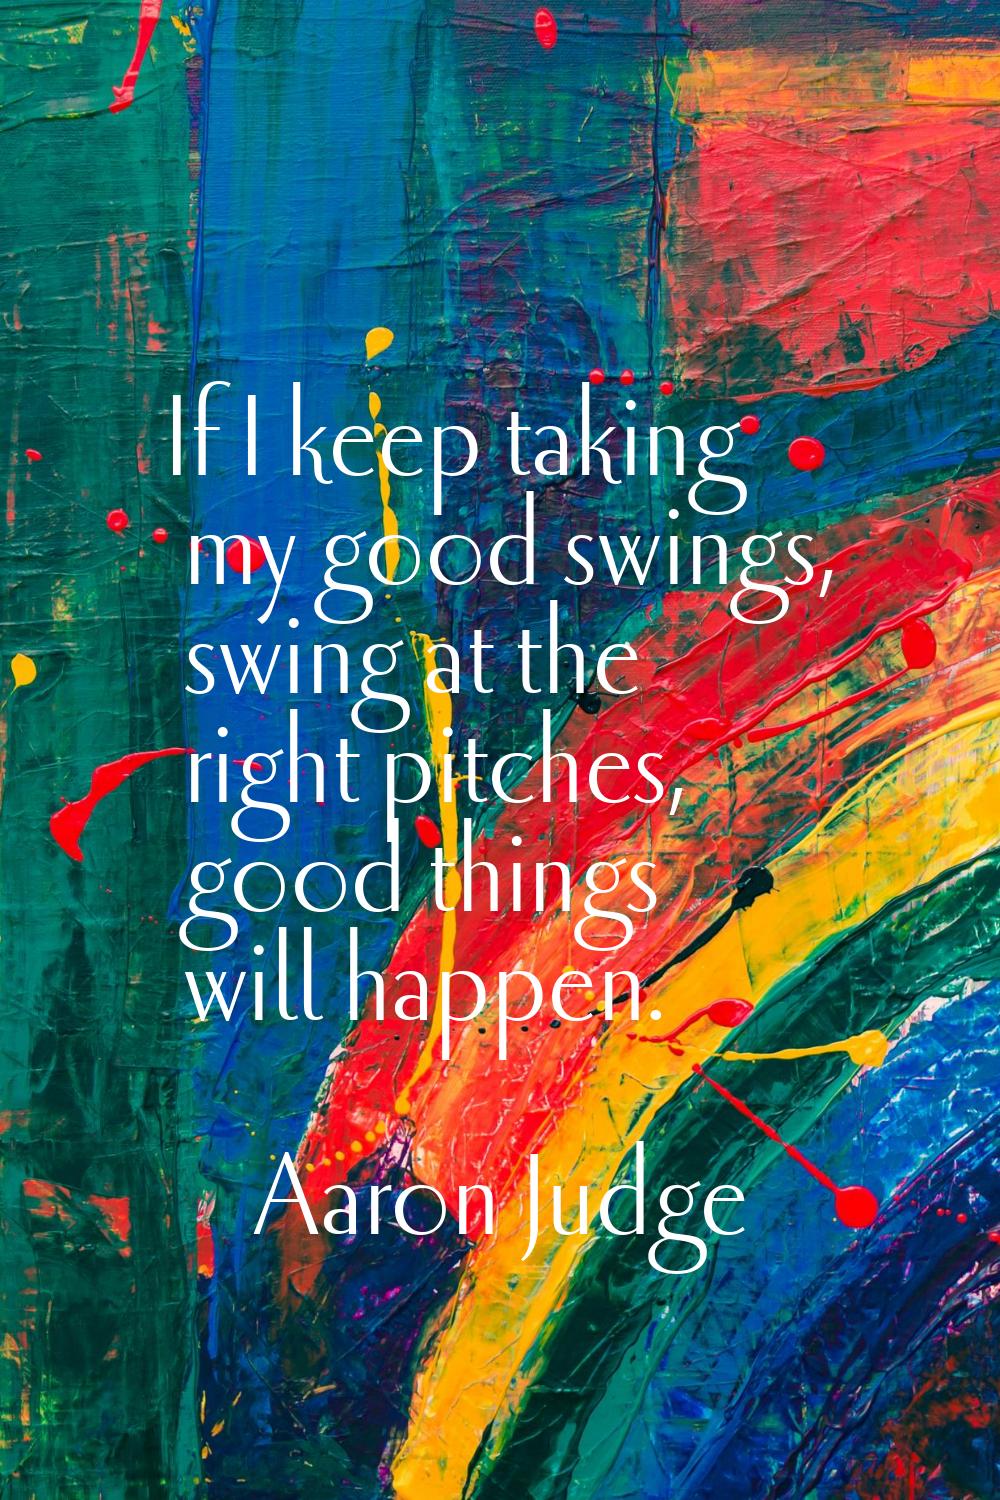 If I keep taking my good swings, swing at the right pitches, good things will happen.